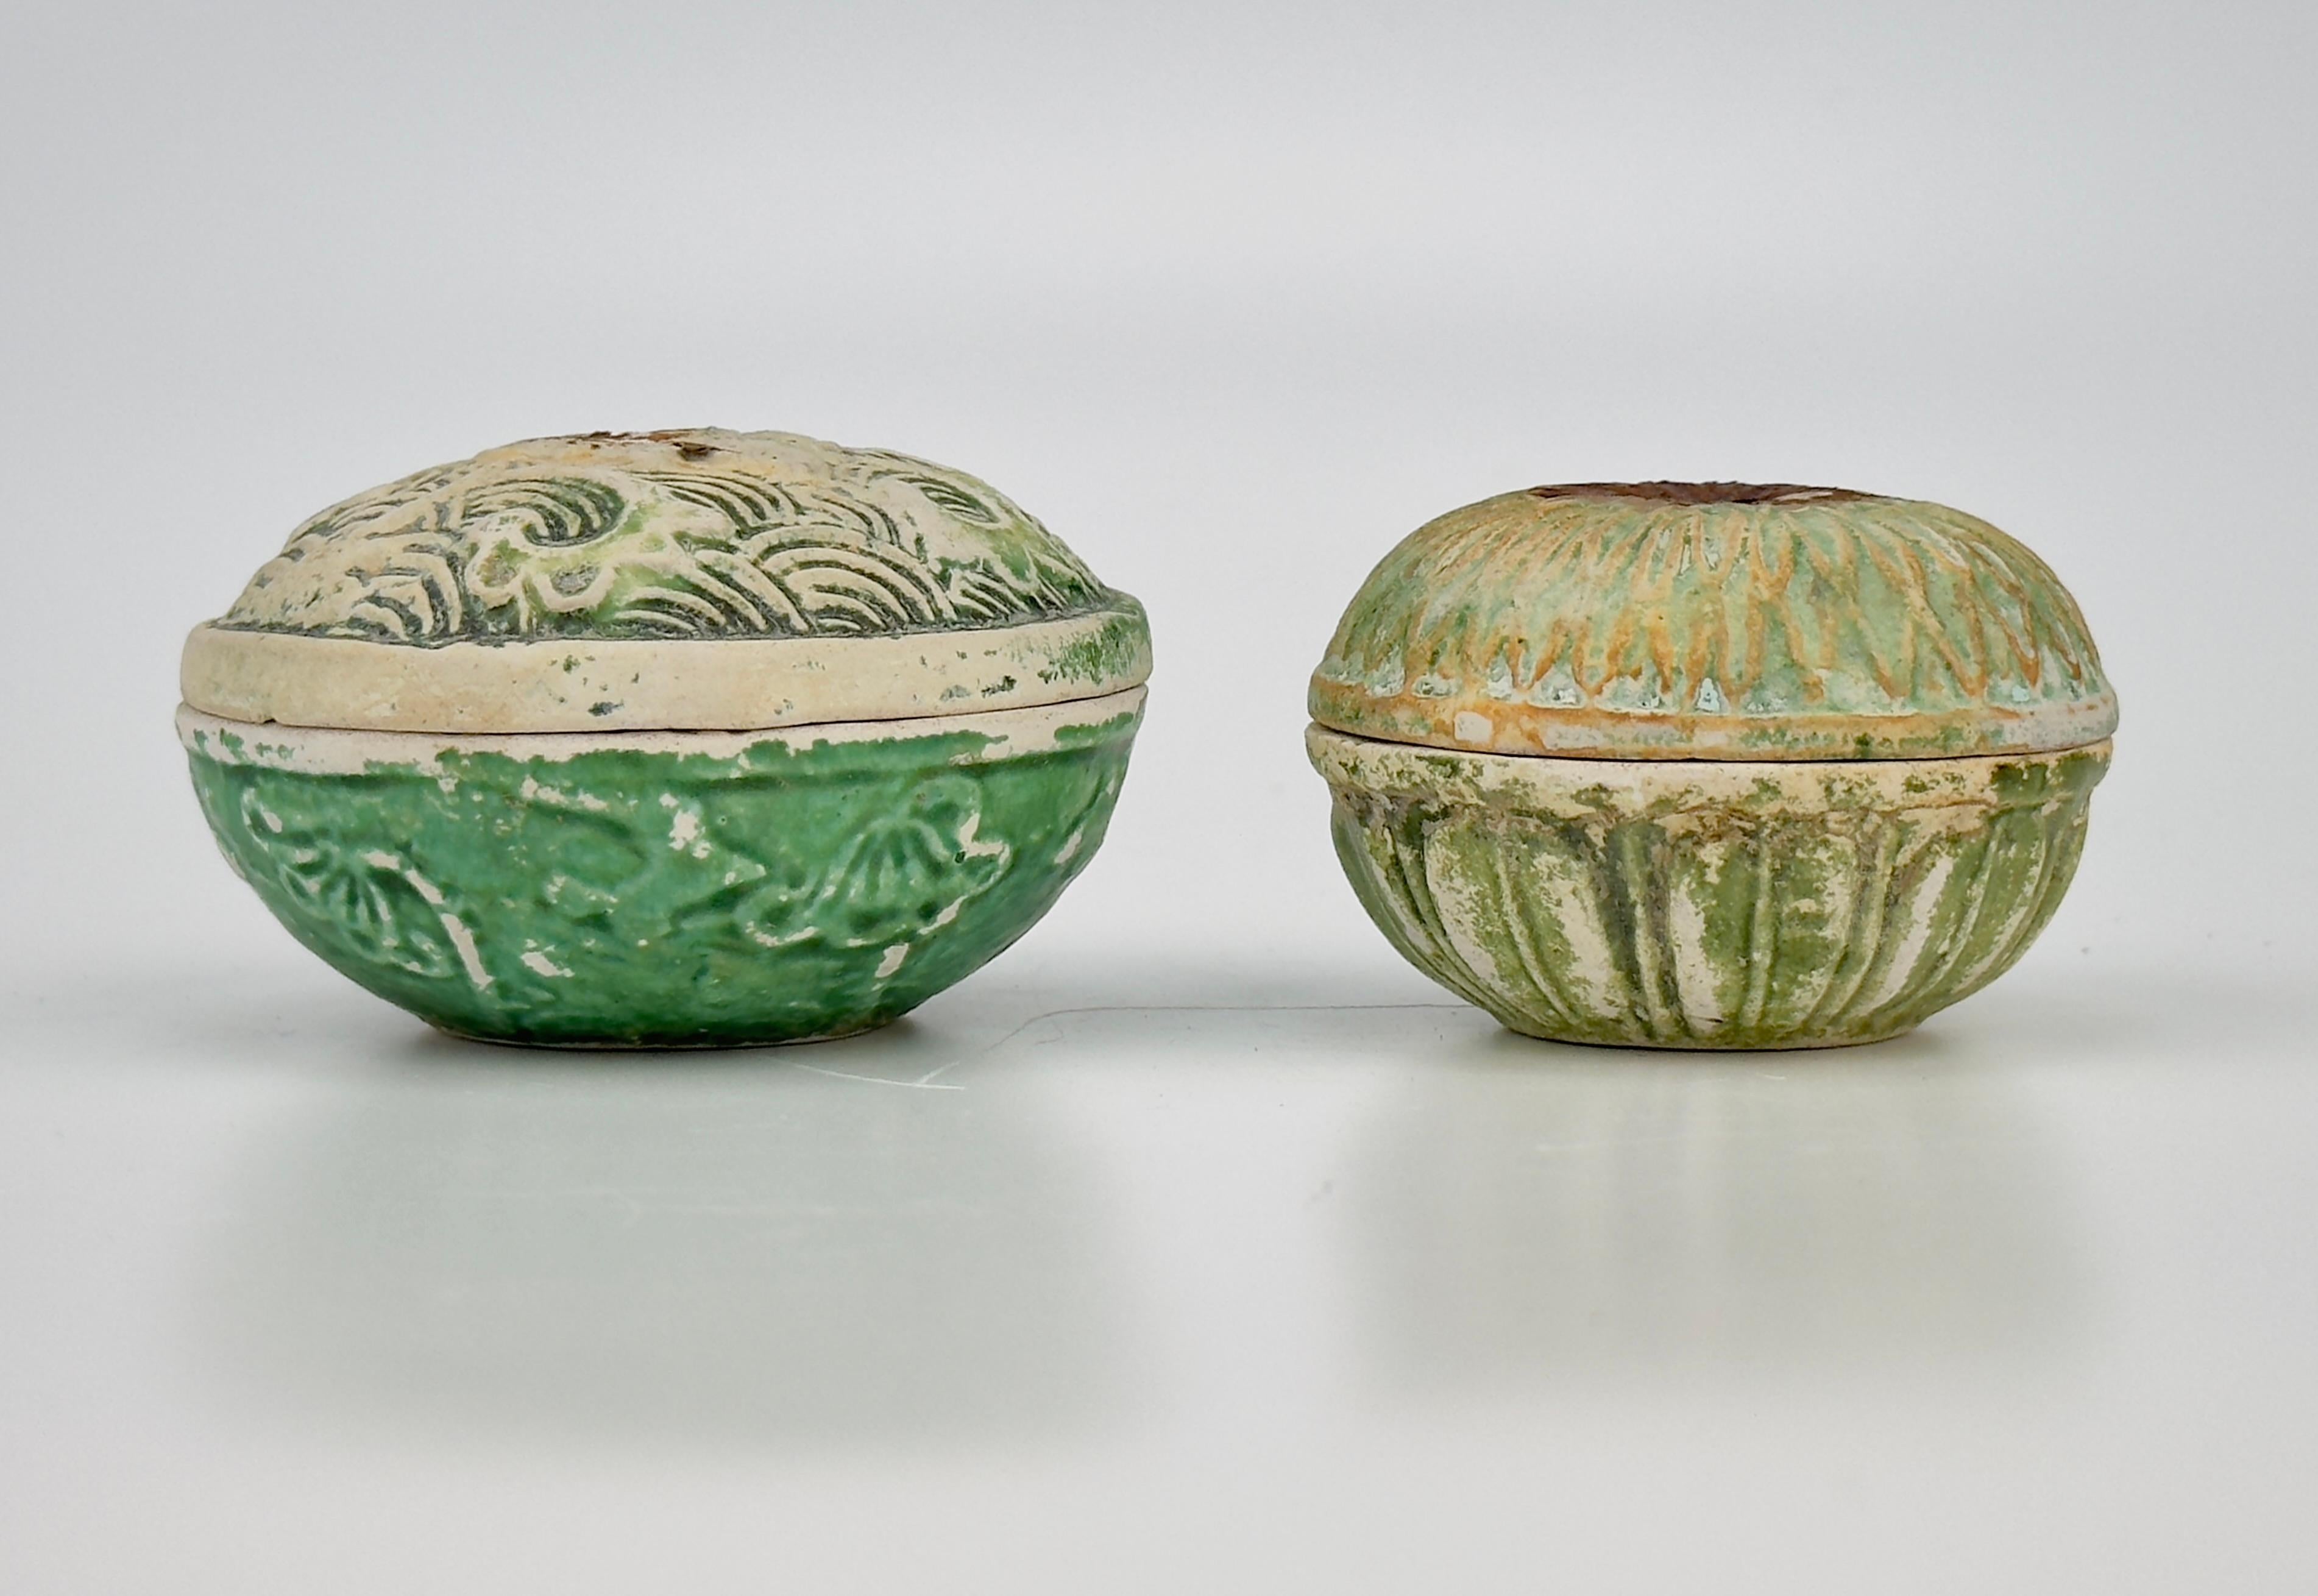 Small green-glazed boxes from the late Ming dynasty cargo. Identical pieces are included on page 142, 143 of the Bin Thuan catalog titled 'The Age of Discovery: Asian Ceramics Found Along the Maritime Silk Road'.

Period: Ming Dynasty (16-17th